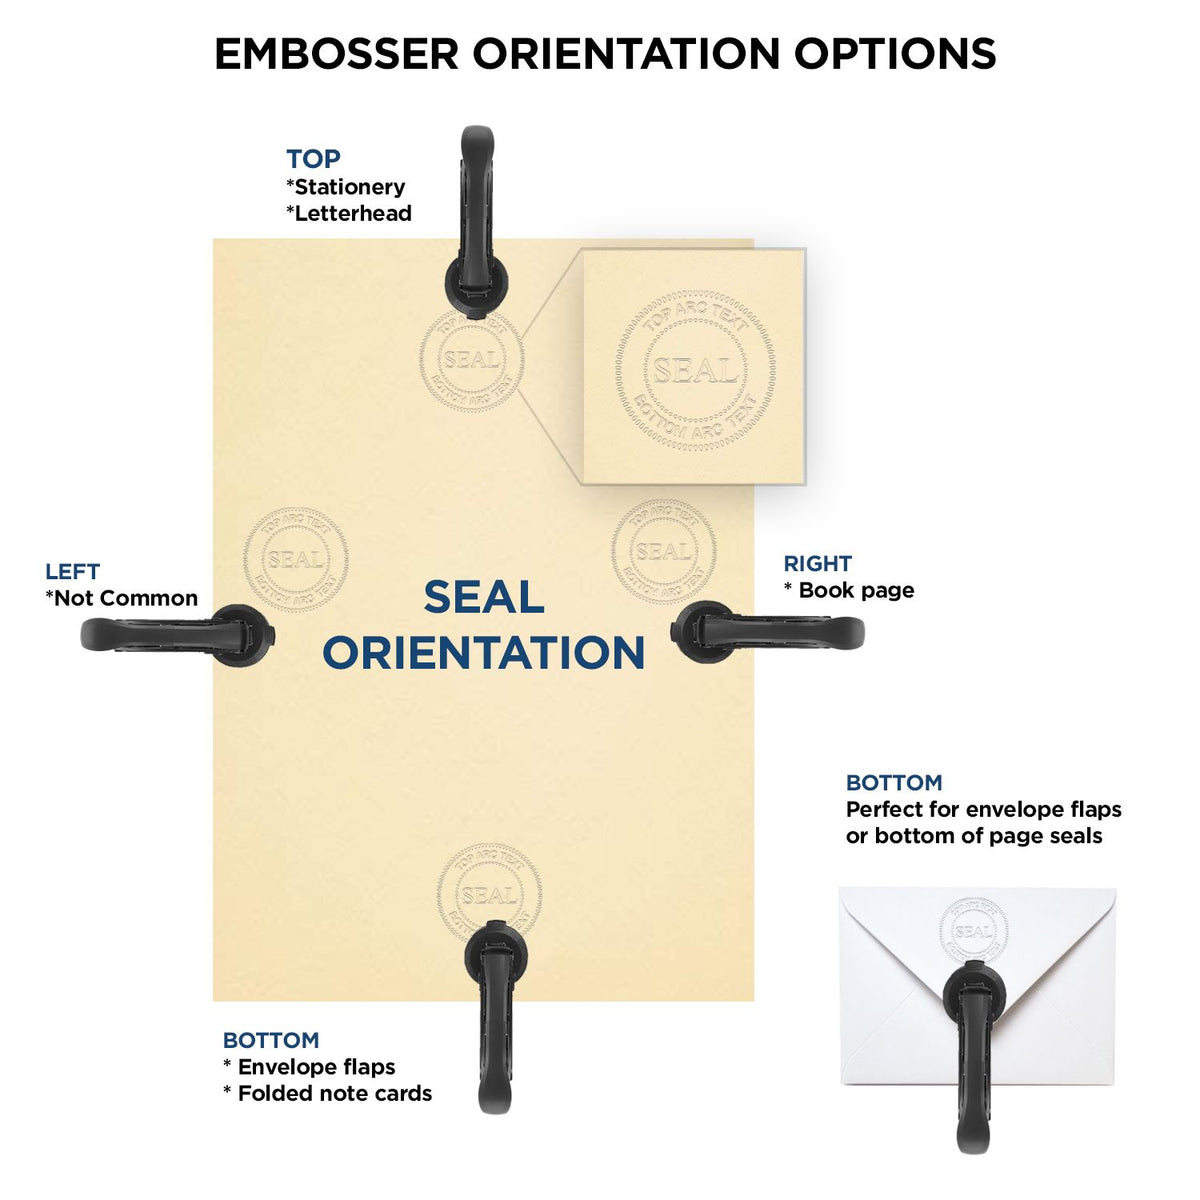 An infographic for the Handheld Wyoming Professional Geologist Embosser showing embosser orientation, this is showing examples of a top, bottom, right and left insert.